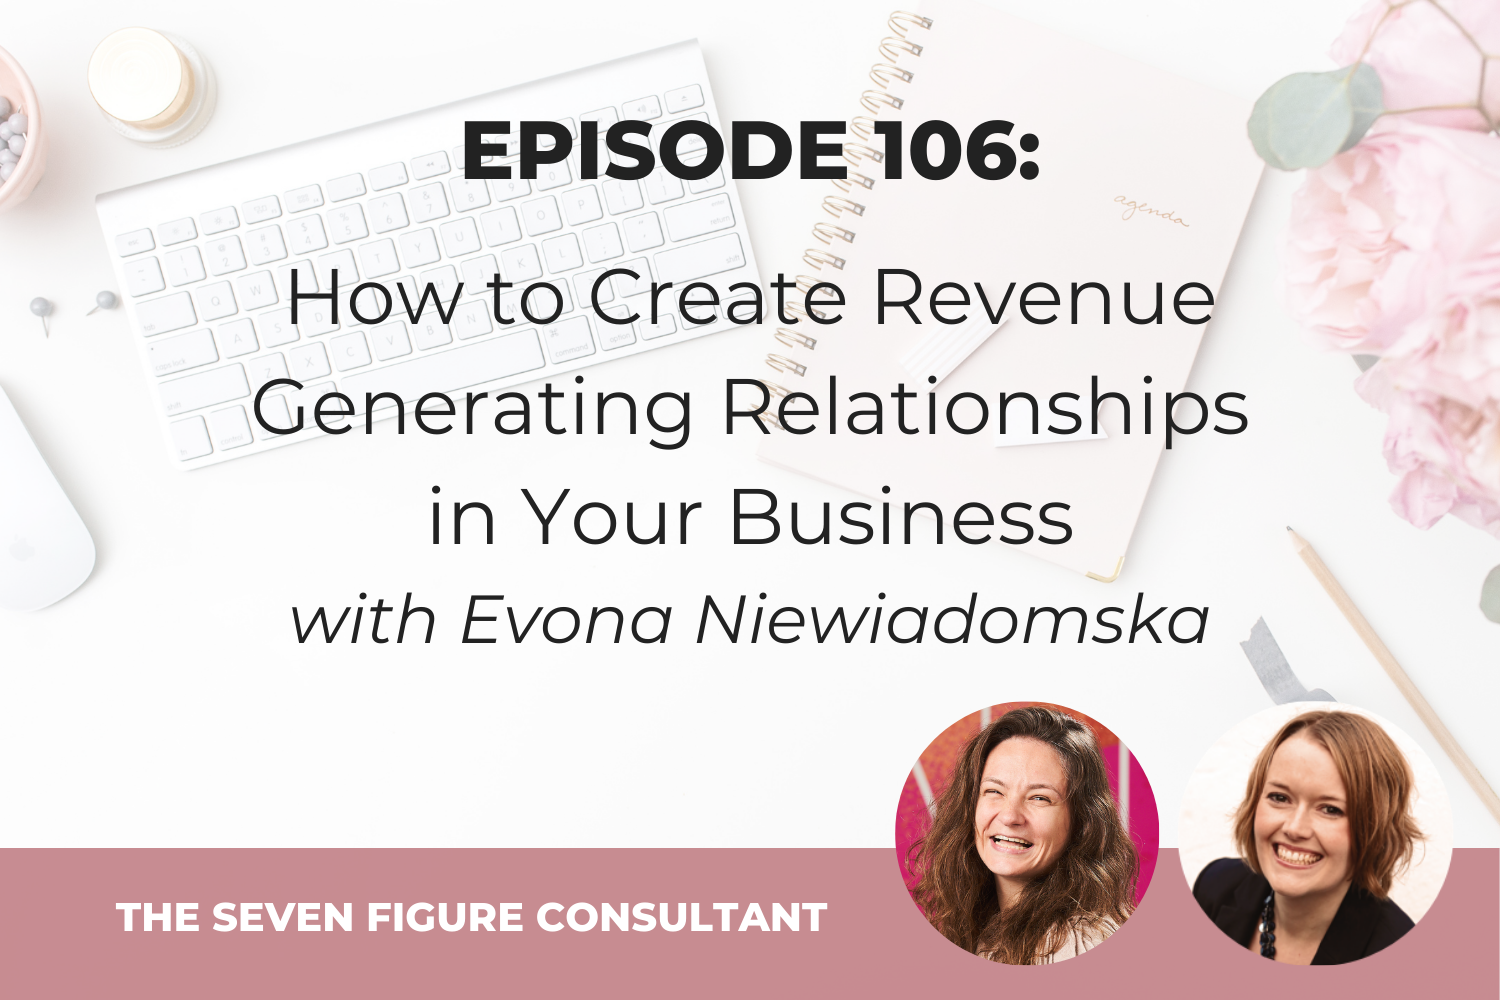 You are currently viewing Episode 106: How to Create Revenue Generating Relationships in Your Business, with Evona Niewiadomska